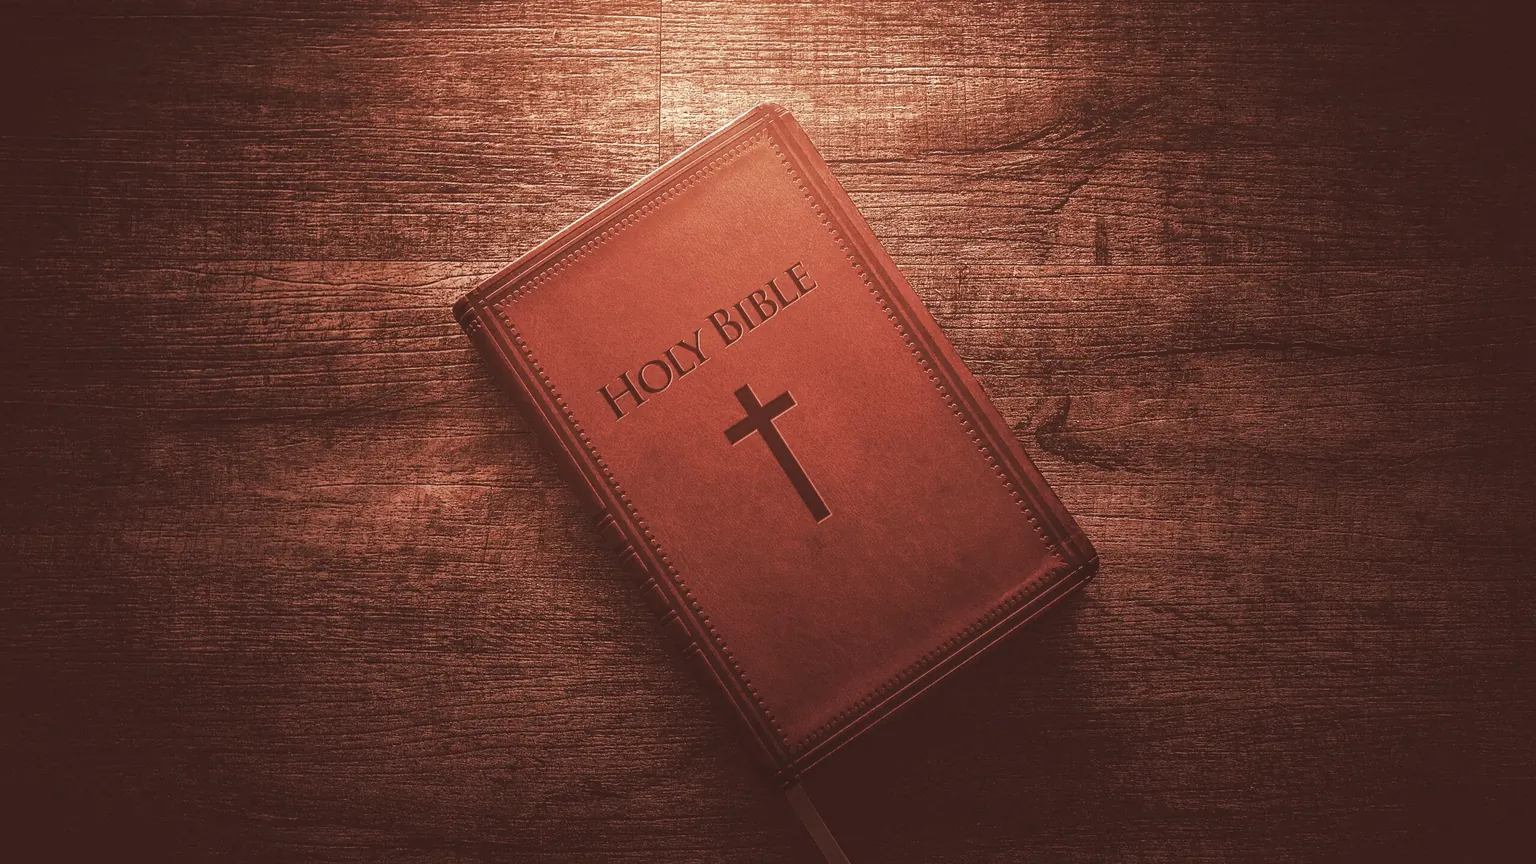 The Holy Bible. Image: Shutterstock